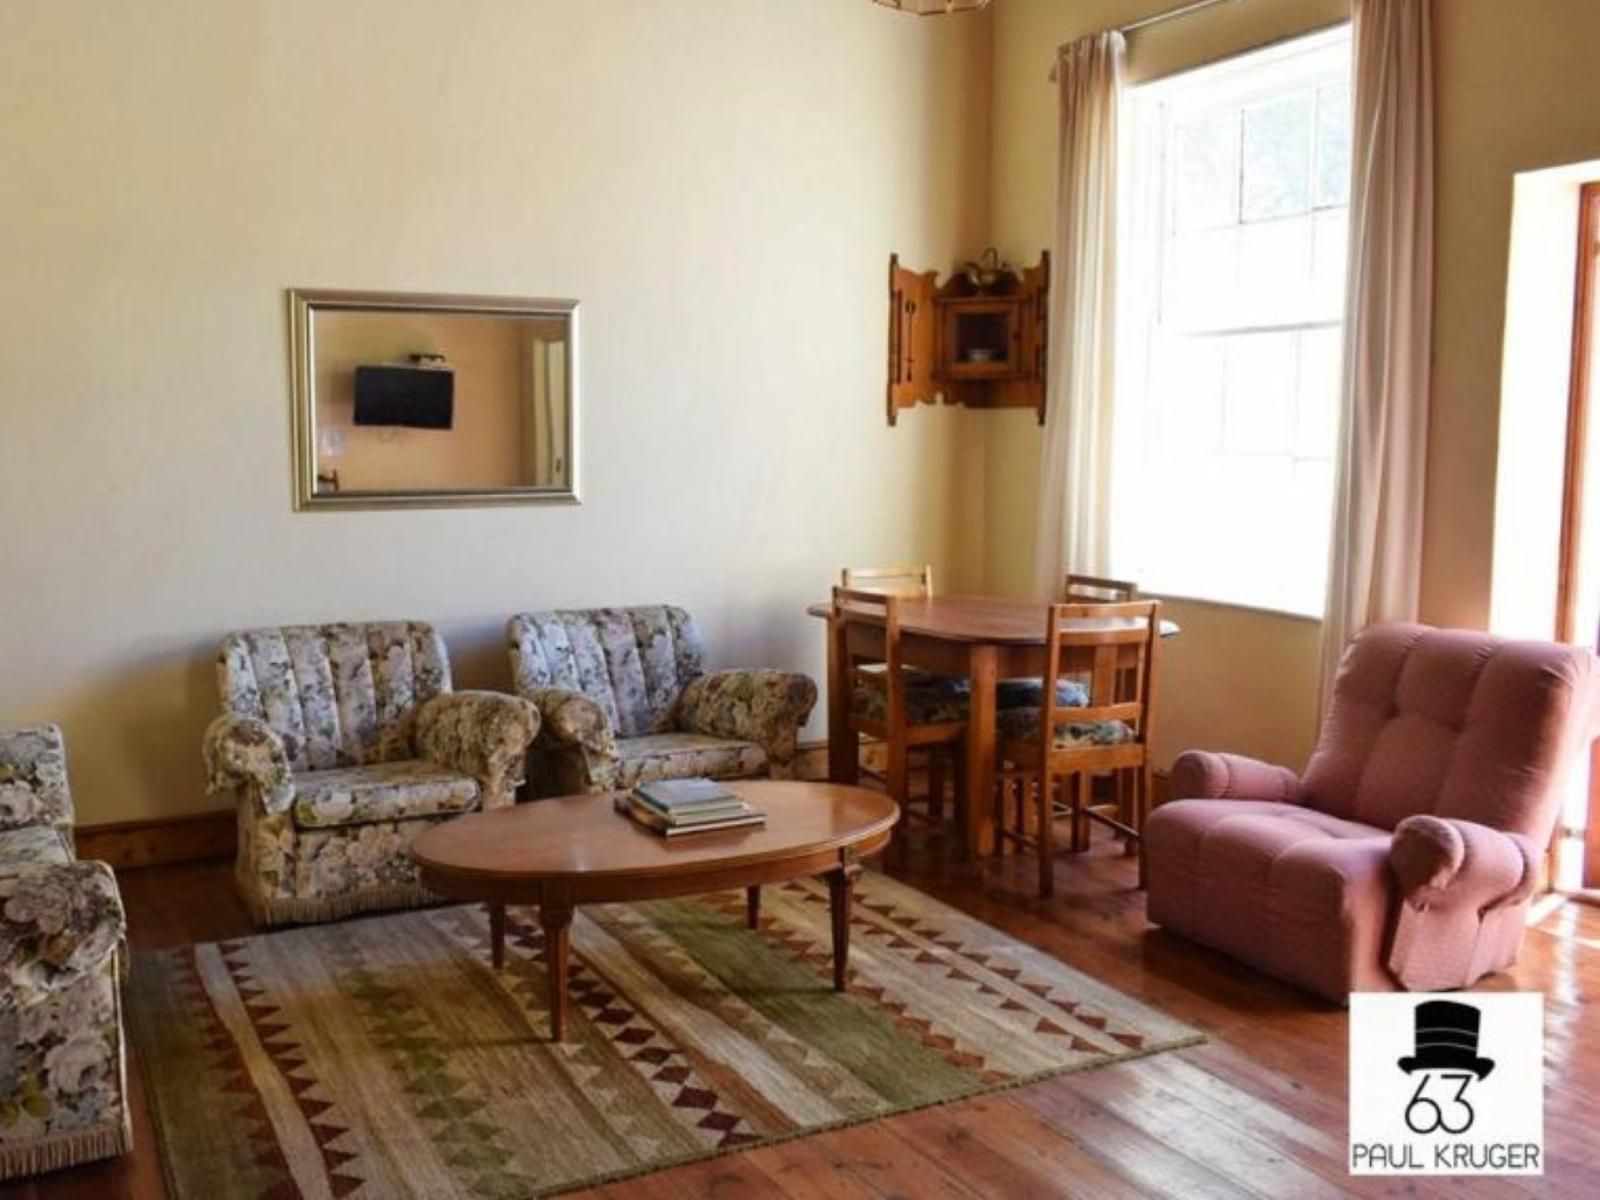 Paul Kruger 63 Selfcatering Cottage Robertson Western Cape South Africa Living Room